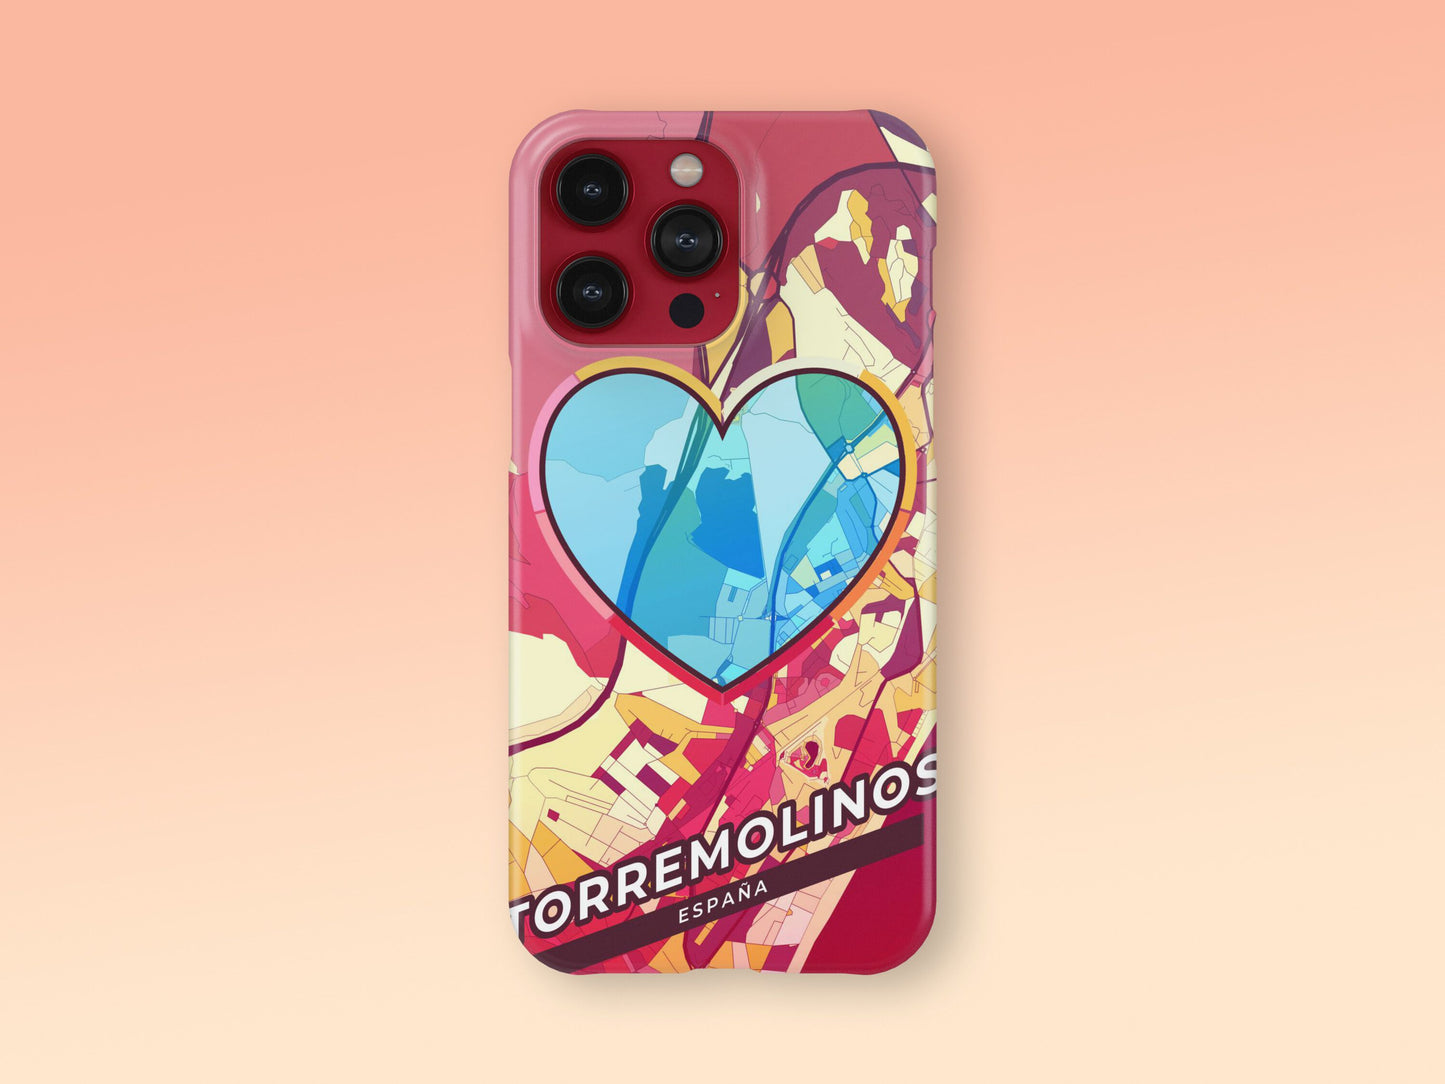 Torremolinos Spain slim phone case with colorful icon. Birthday, wedding or housewarming gift. Couple match cases. 2